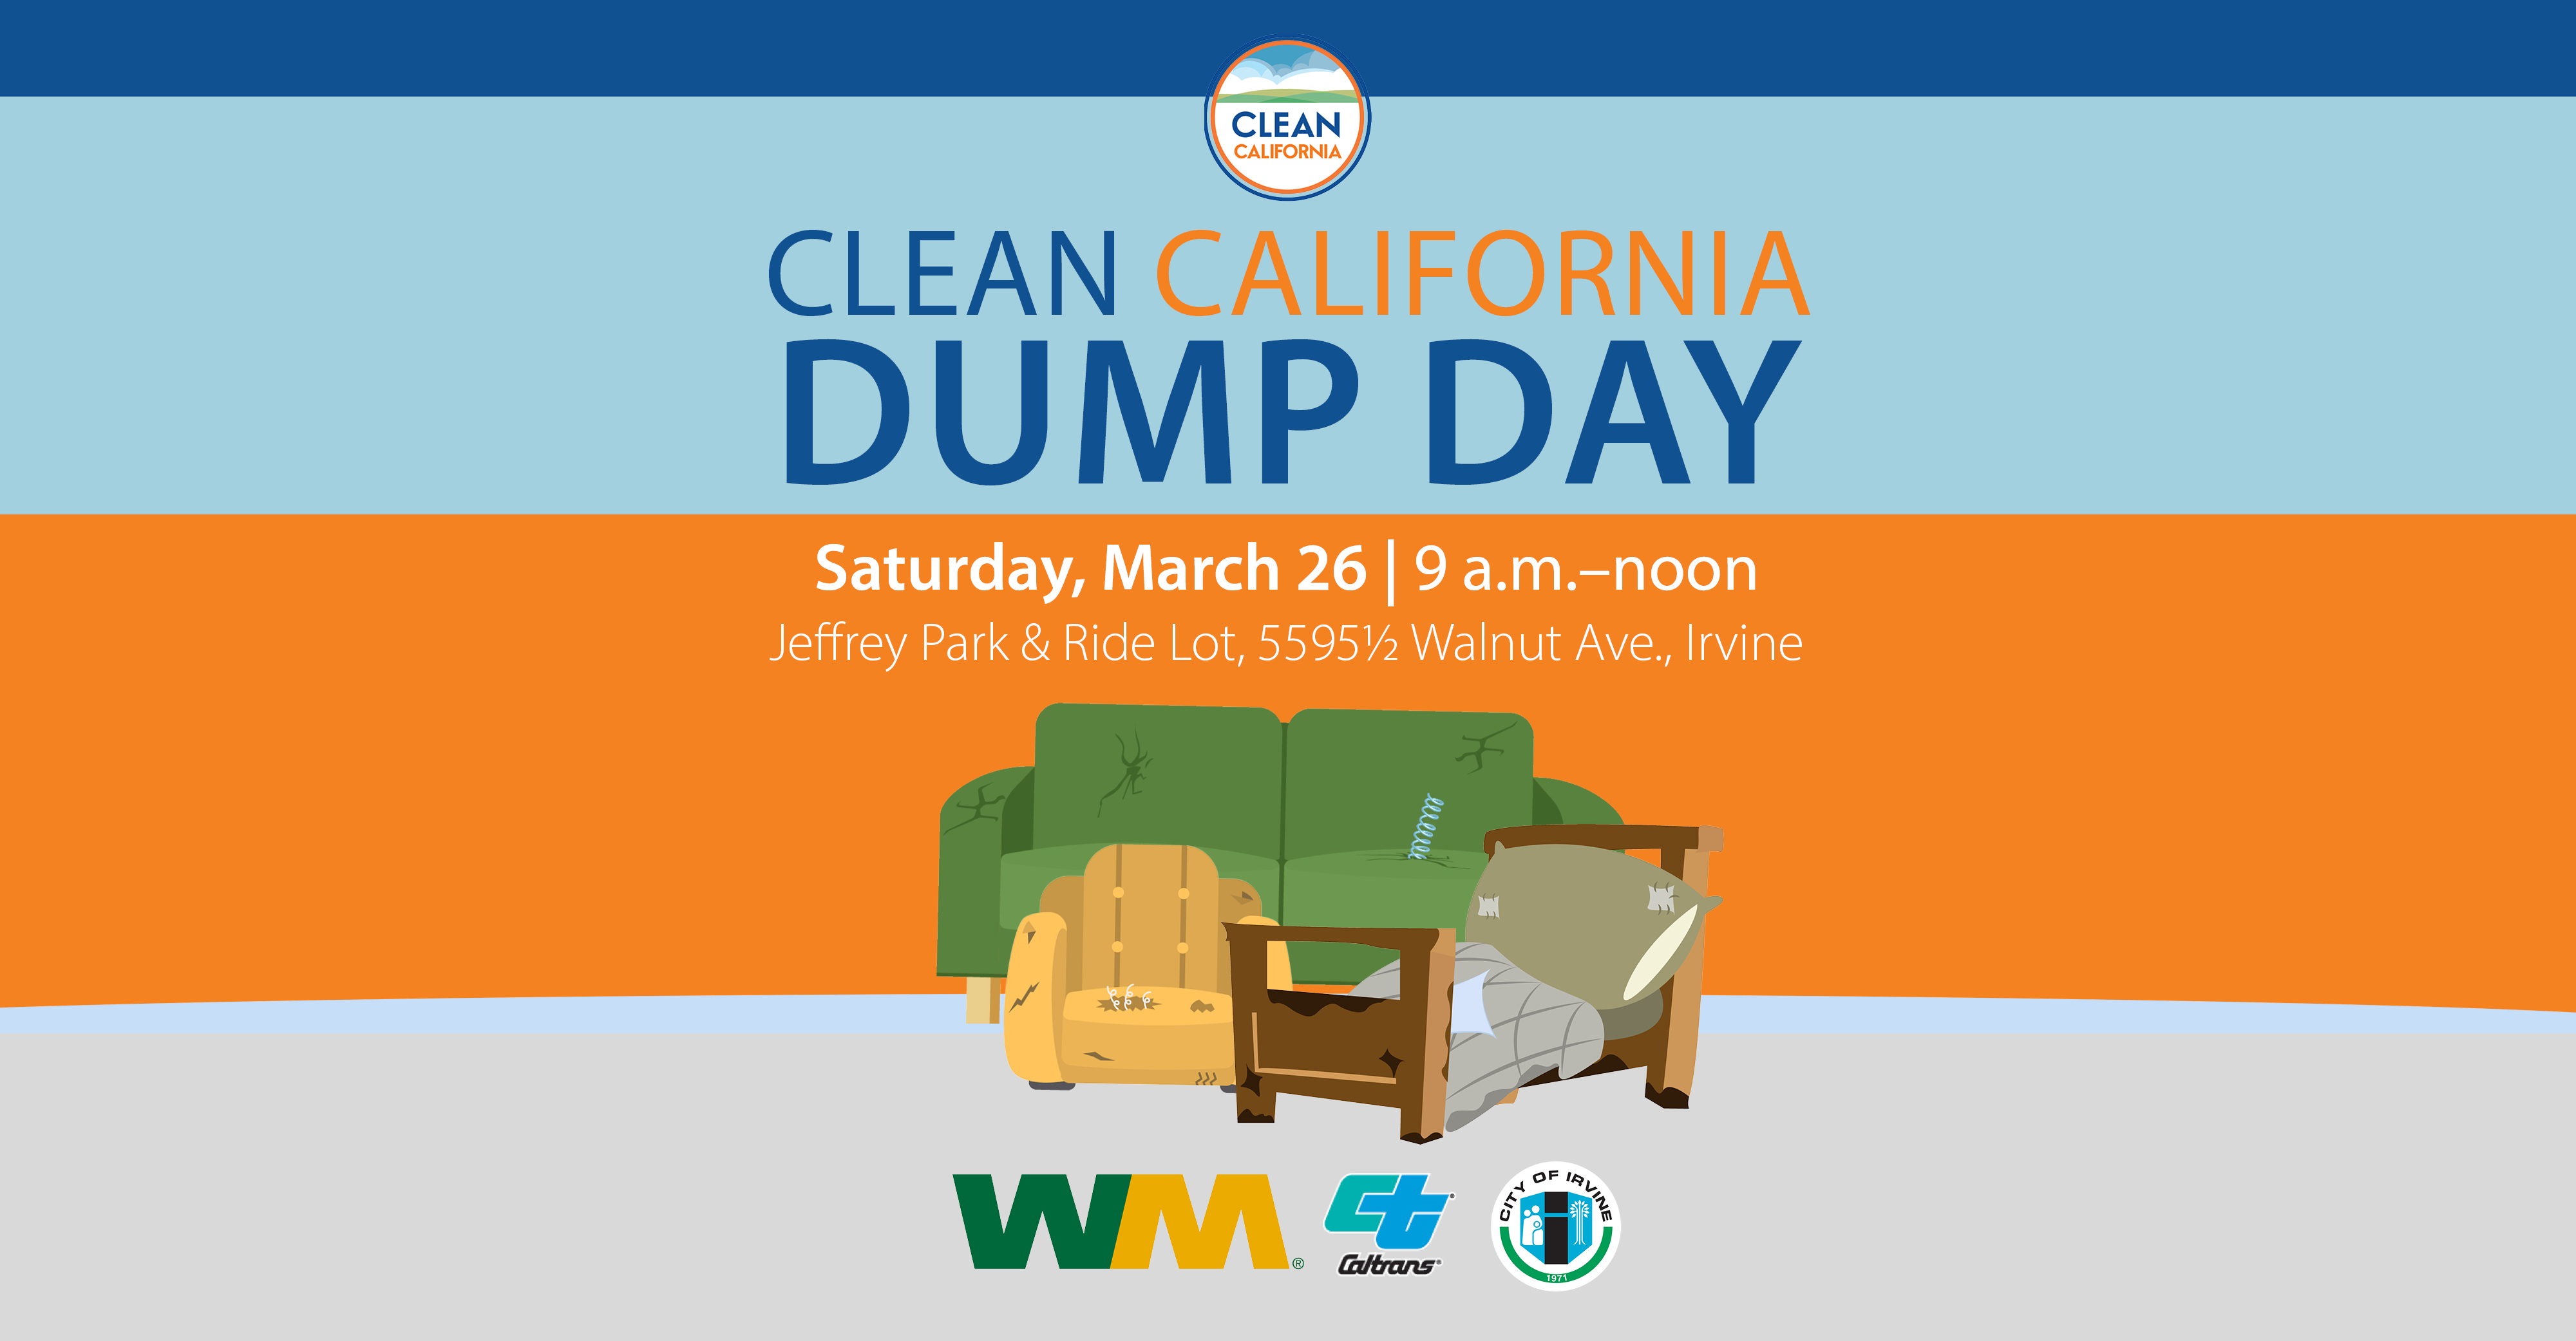 City of Irvine, Caltrans, and Waste Management Partner to Hold Clean